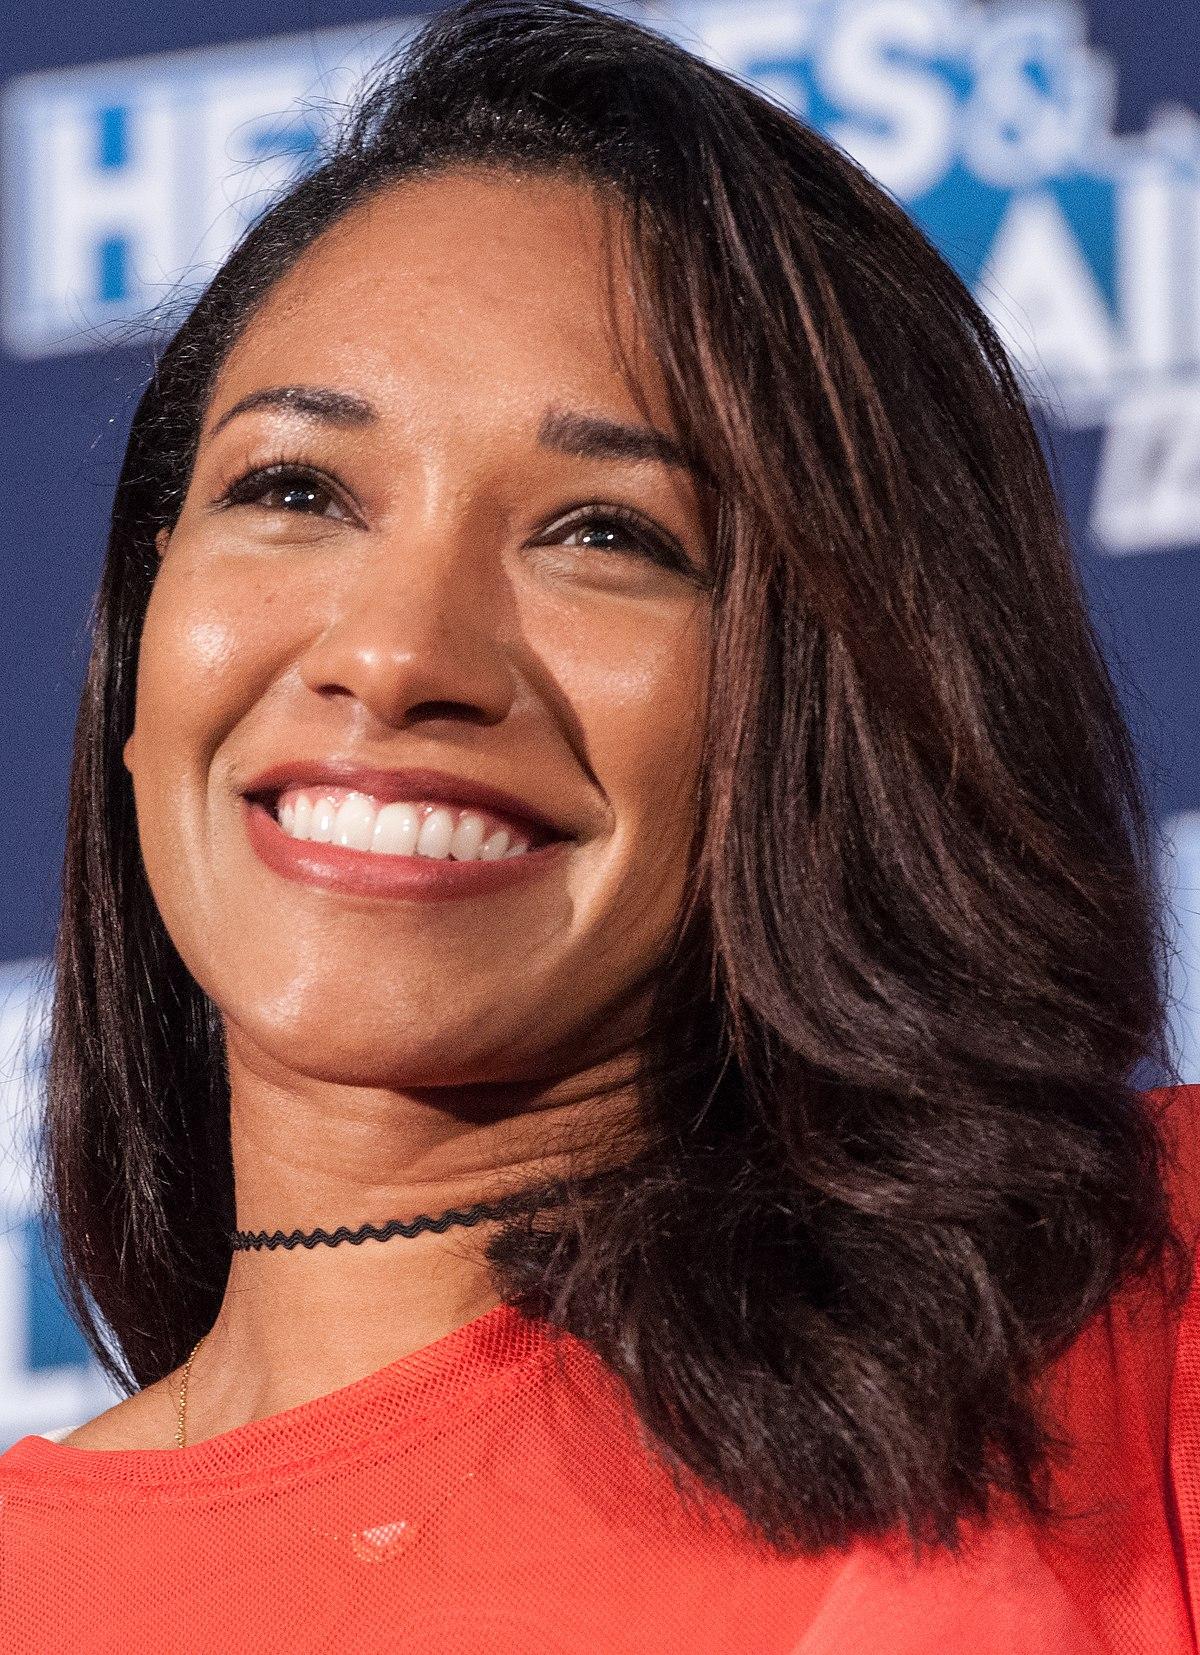 70+ Hot Pictures Of Candice Patton Who Plays Iris West In Flash TV Series 410